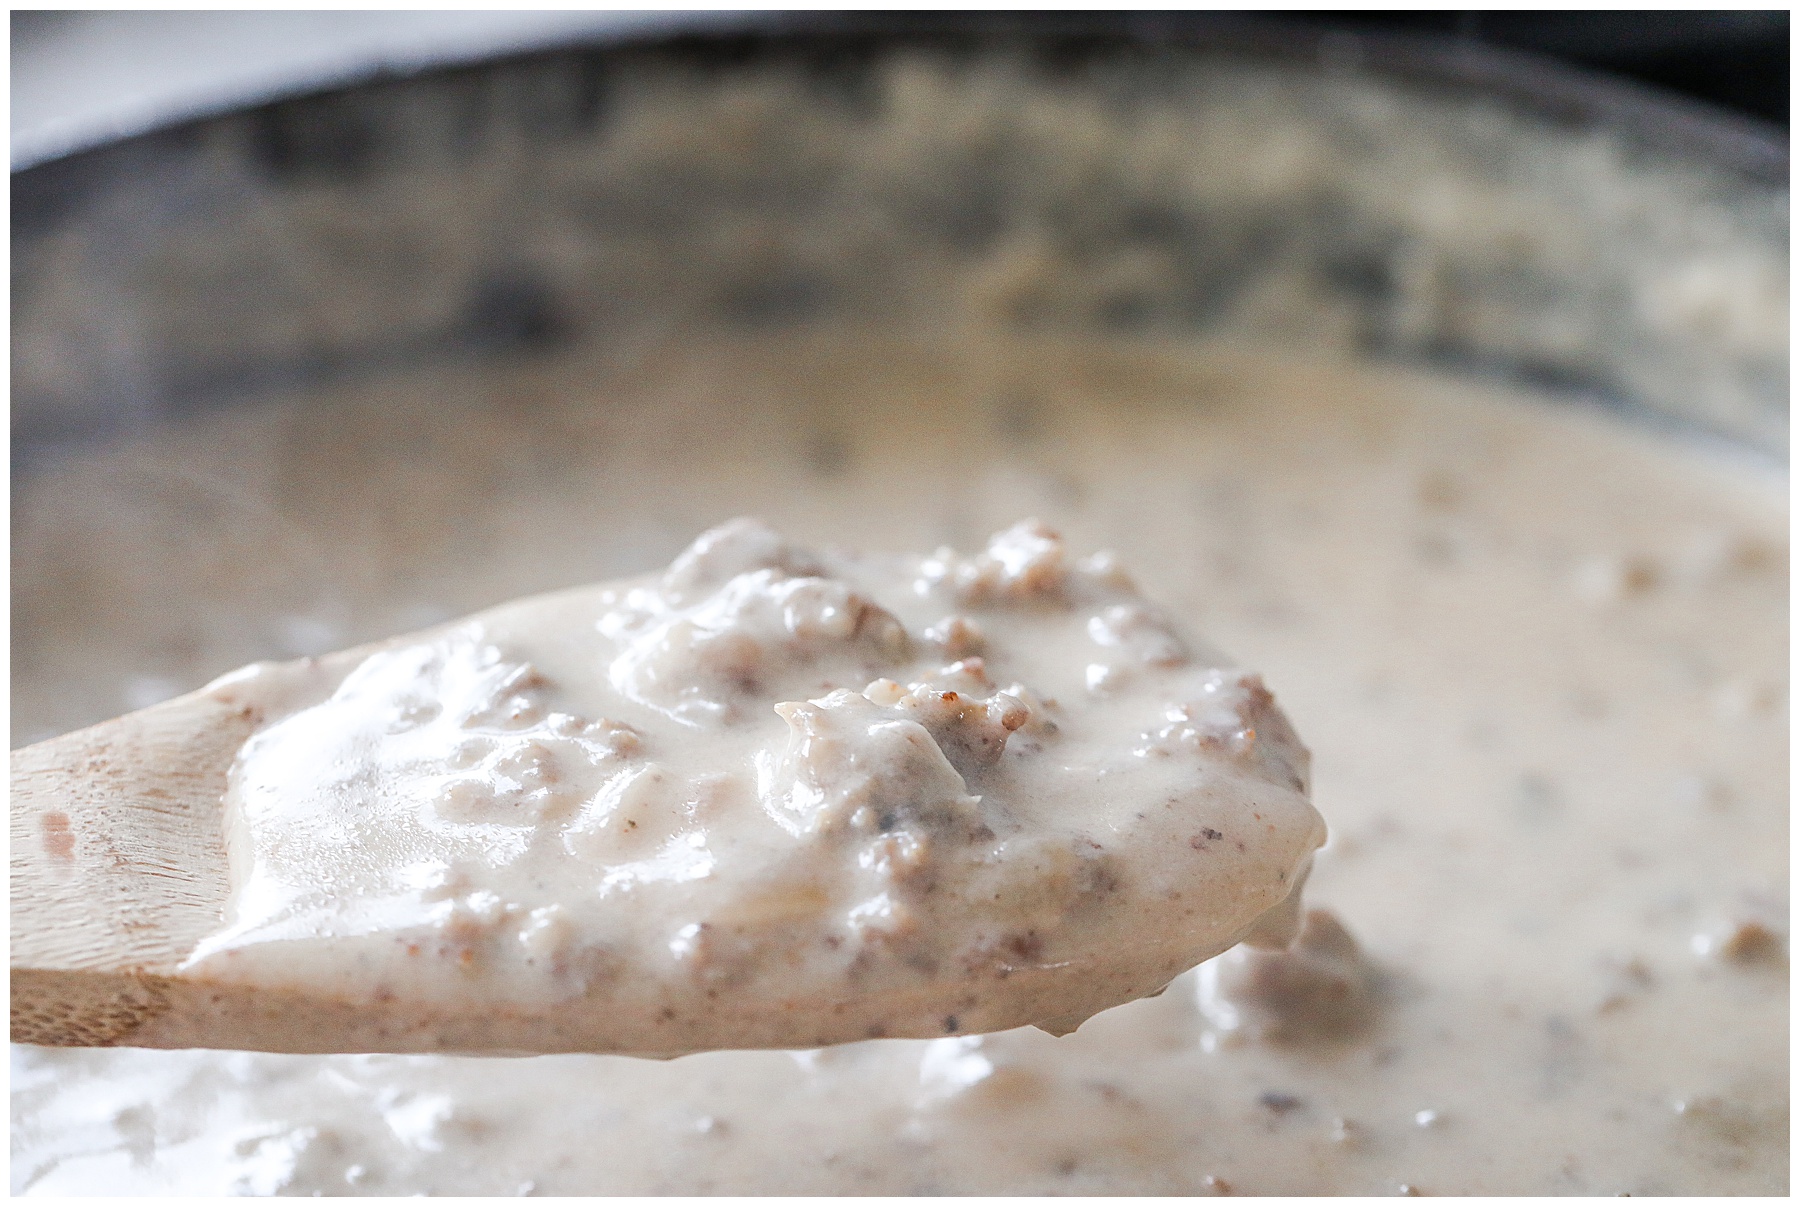 Gravy for biscuits and gravy